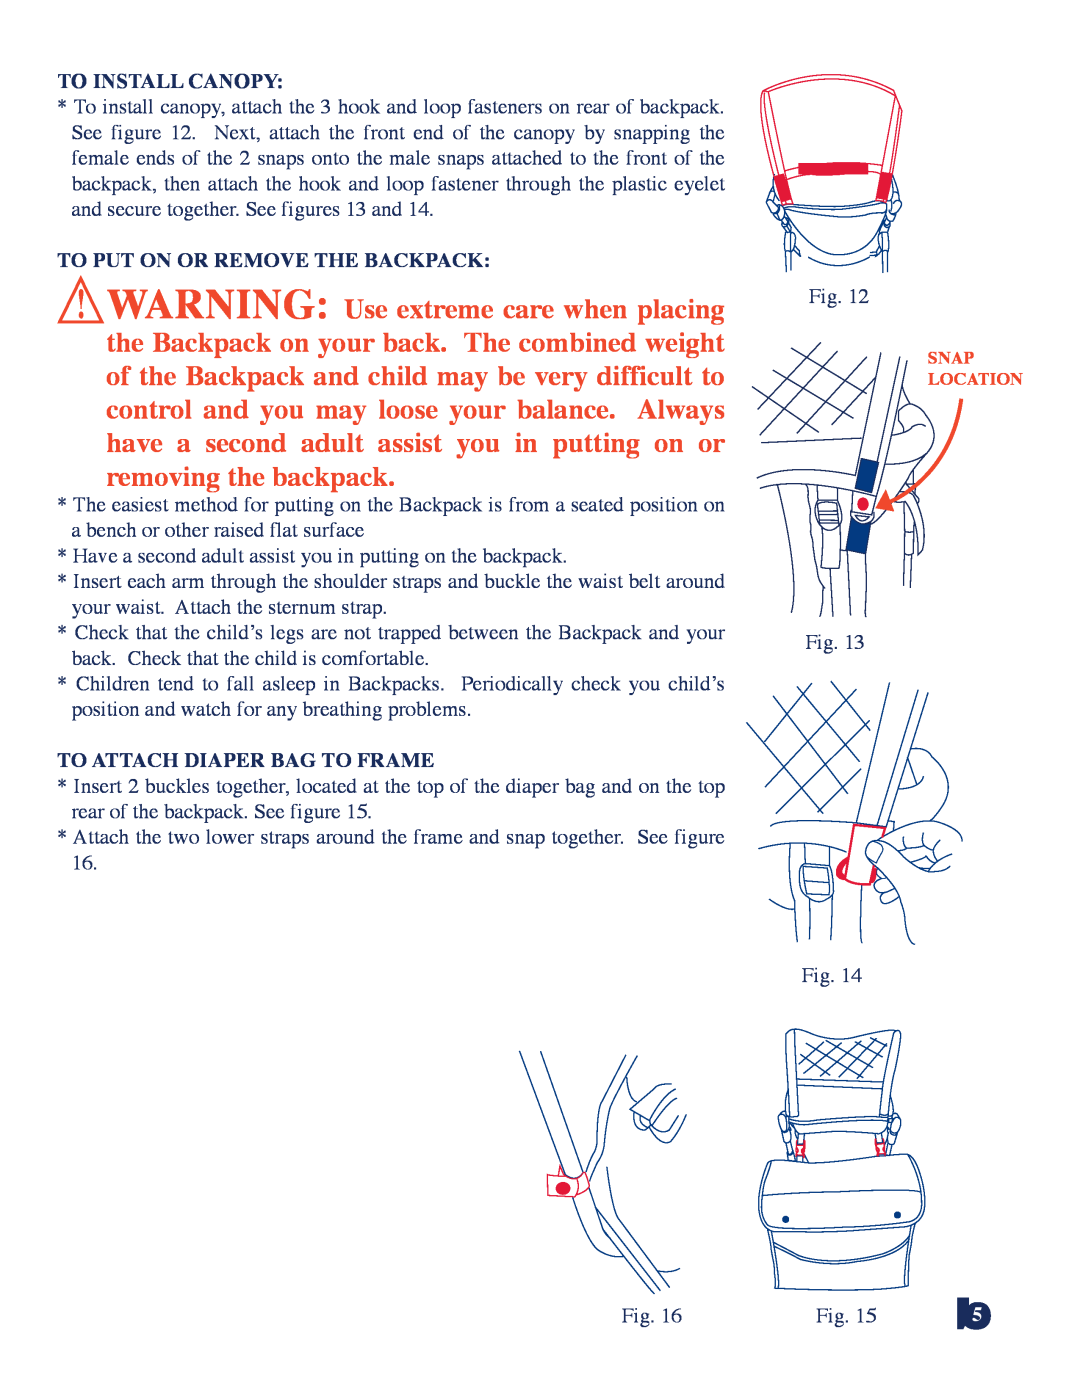 Baby Trend 2512 manual To Install Canopy, To Put On Or Remove The Backpack, To Attach Diaper Bag To Frame 